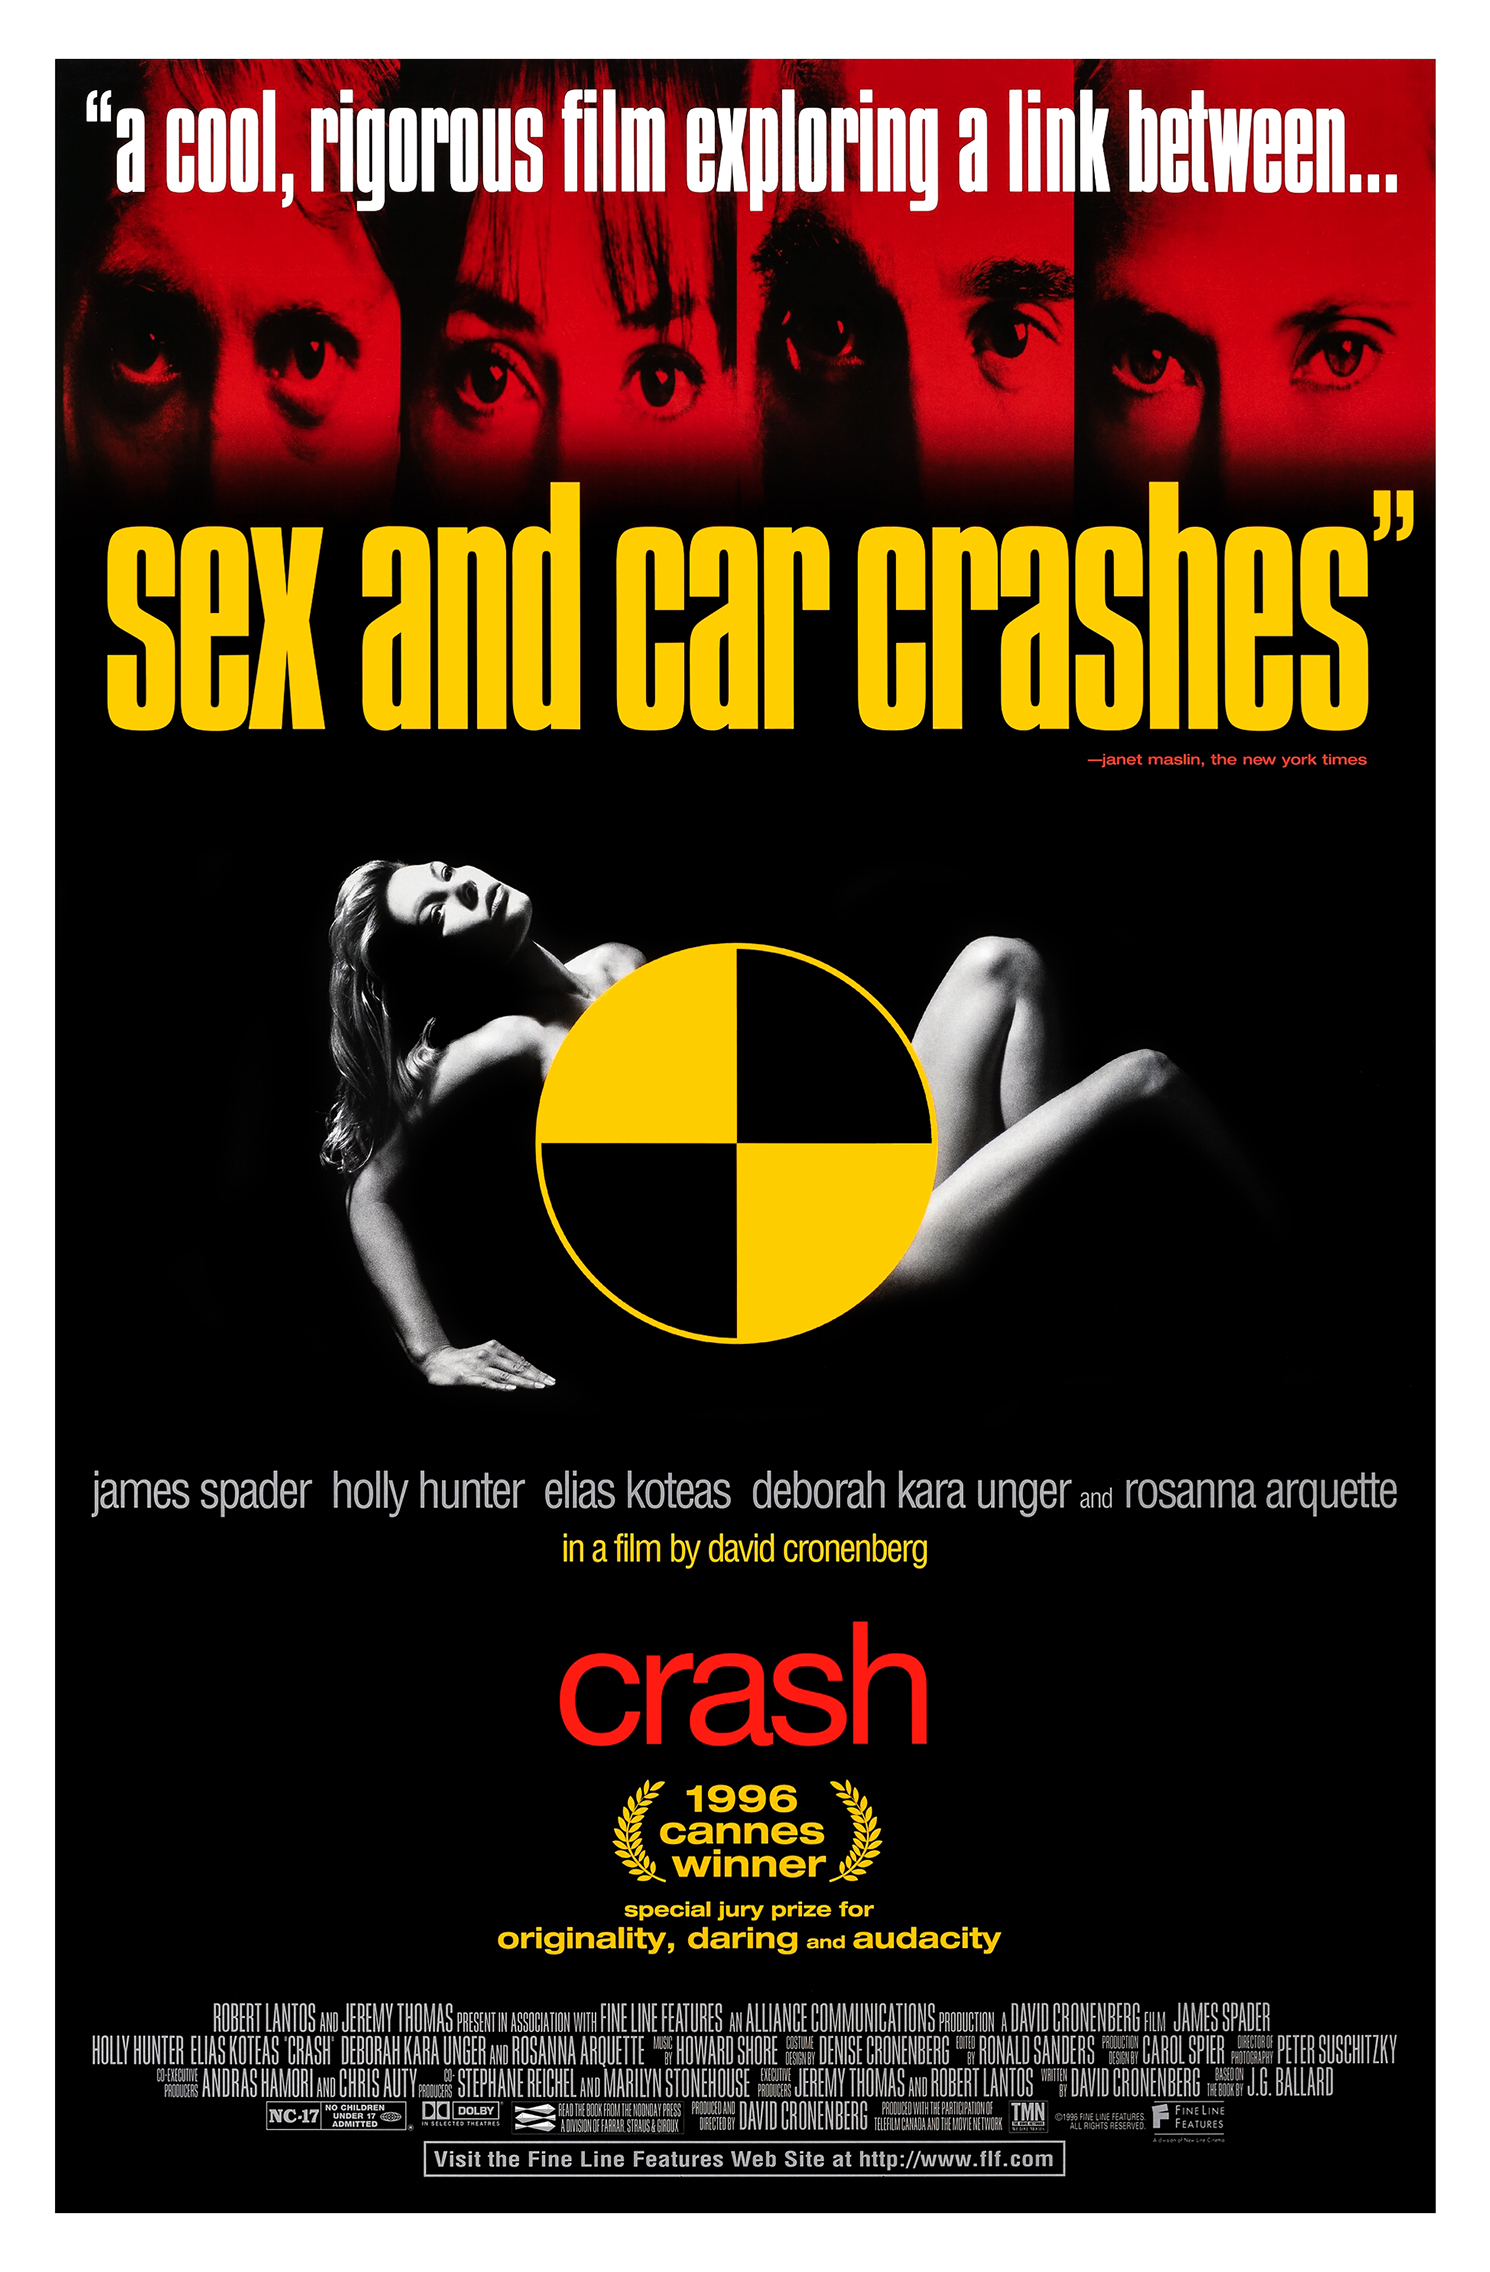 betty bird recommends crash 1996 watch online pic